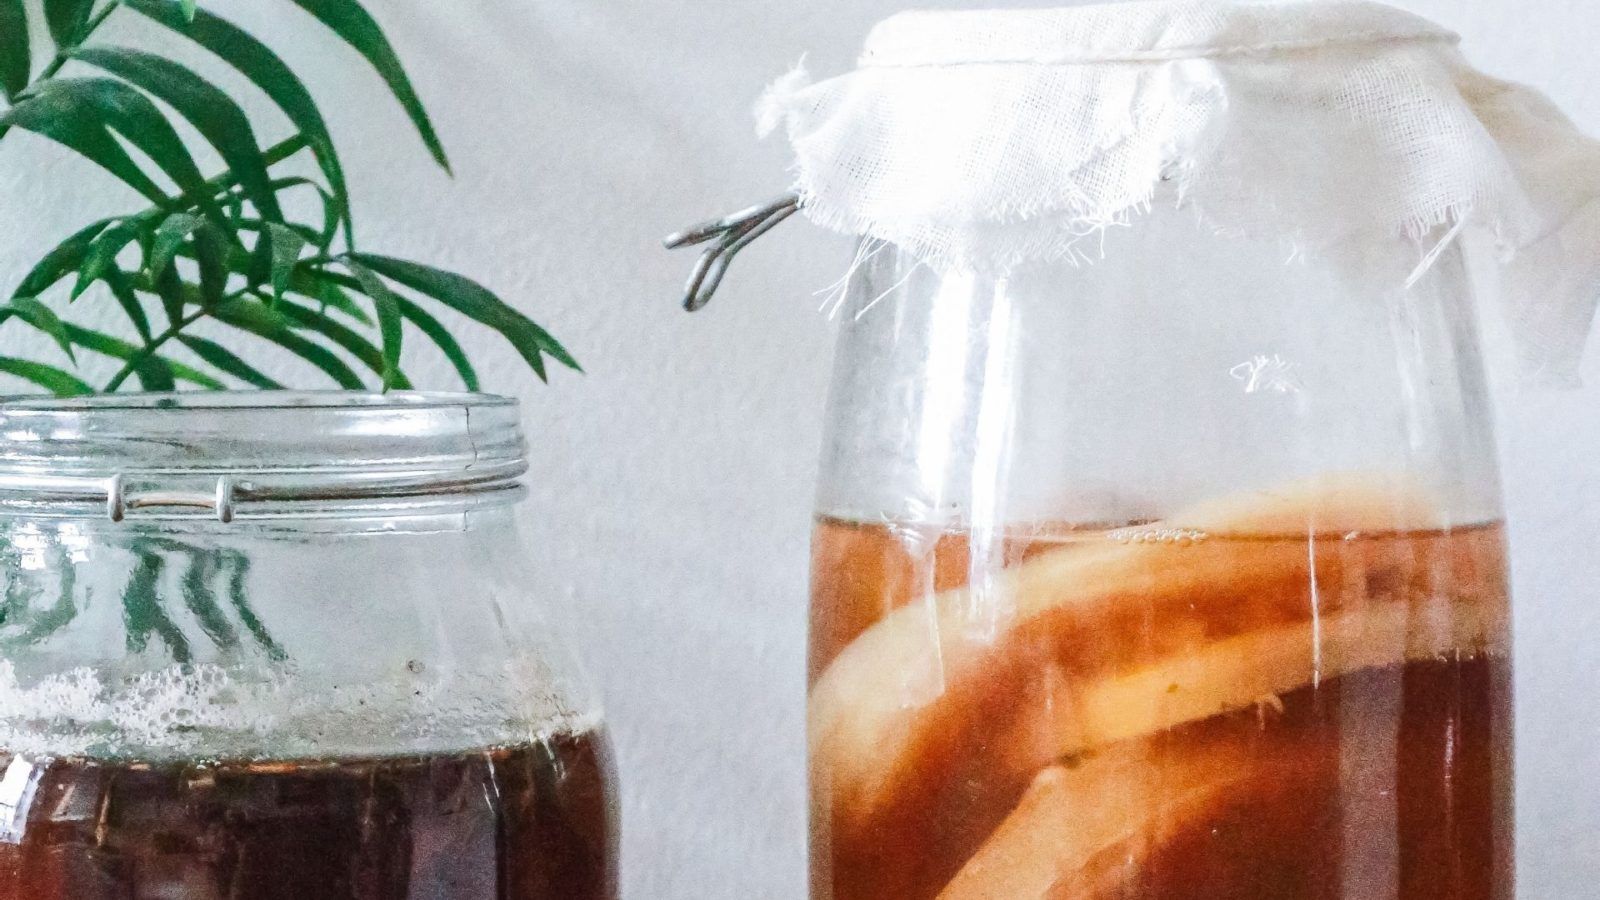 An introduction to Jun, the champagne of kombucha